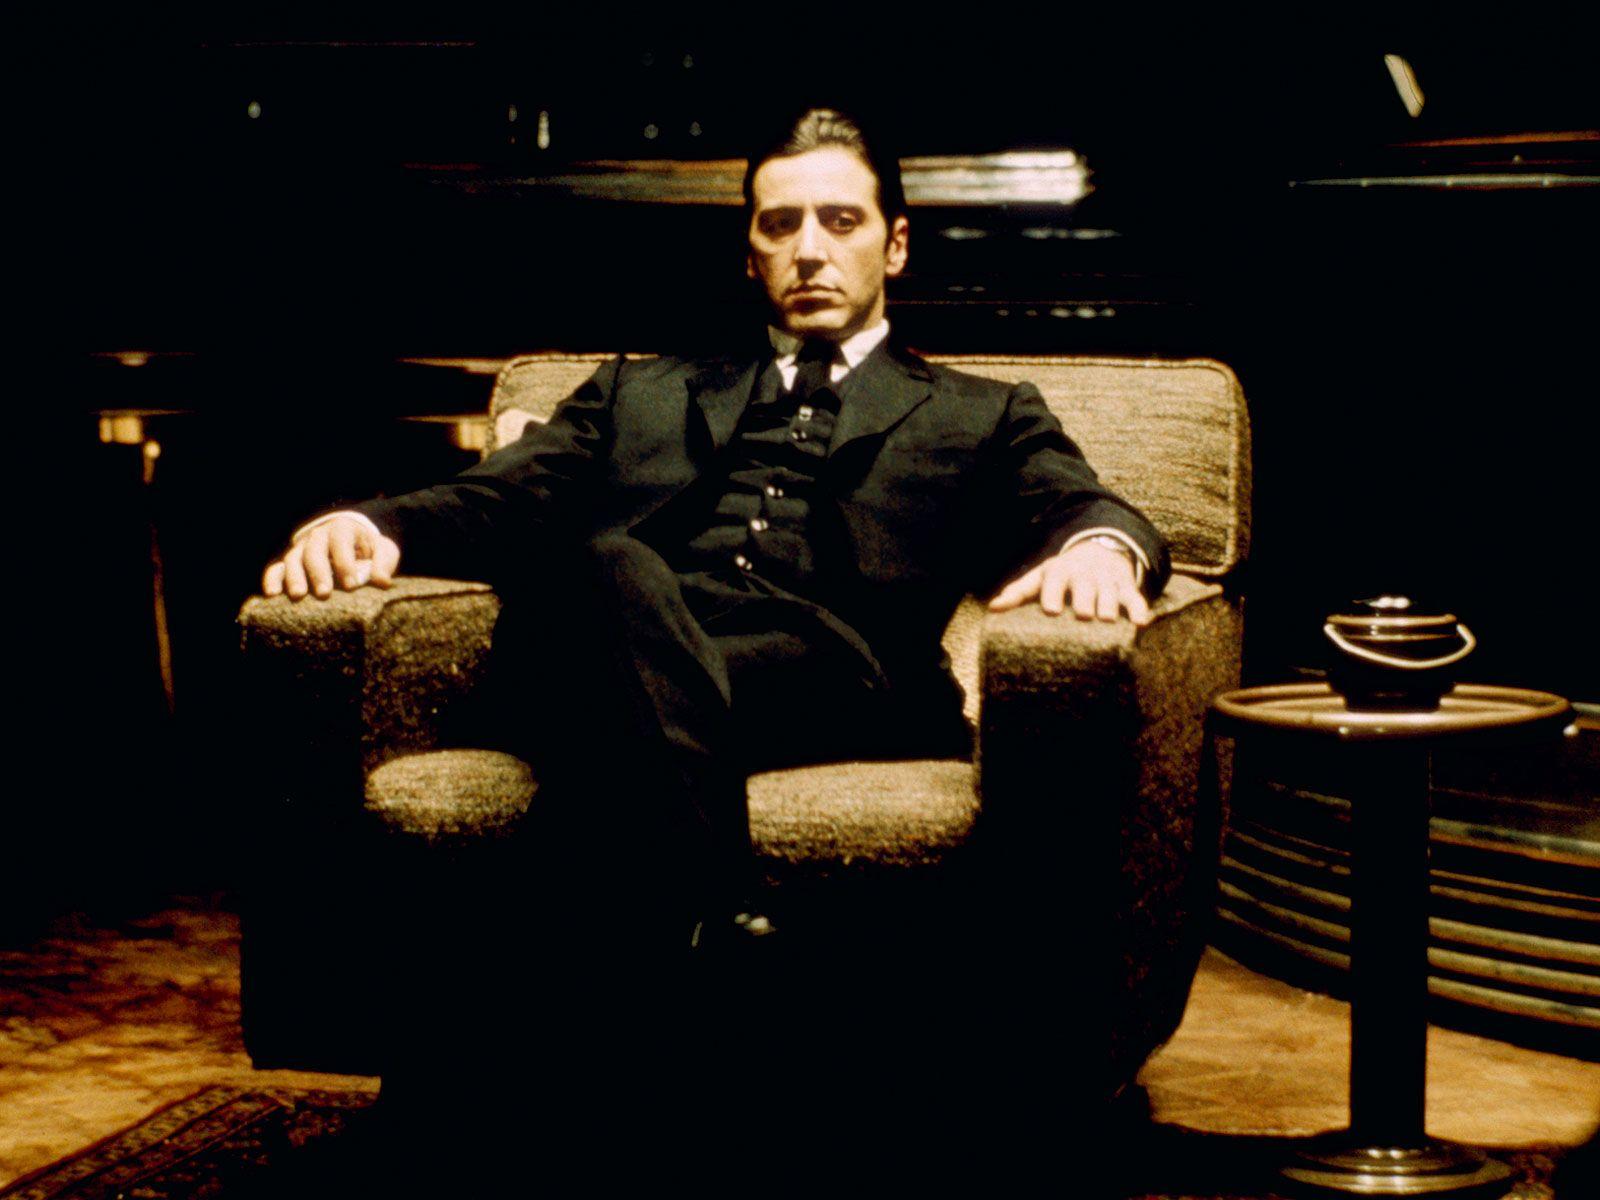 Michael Corleone (Al Pacino) by Francis Ford Coppola. Buy picture